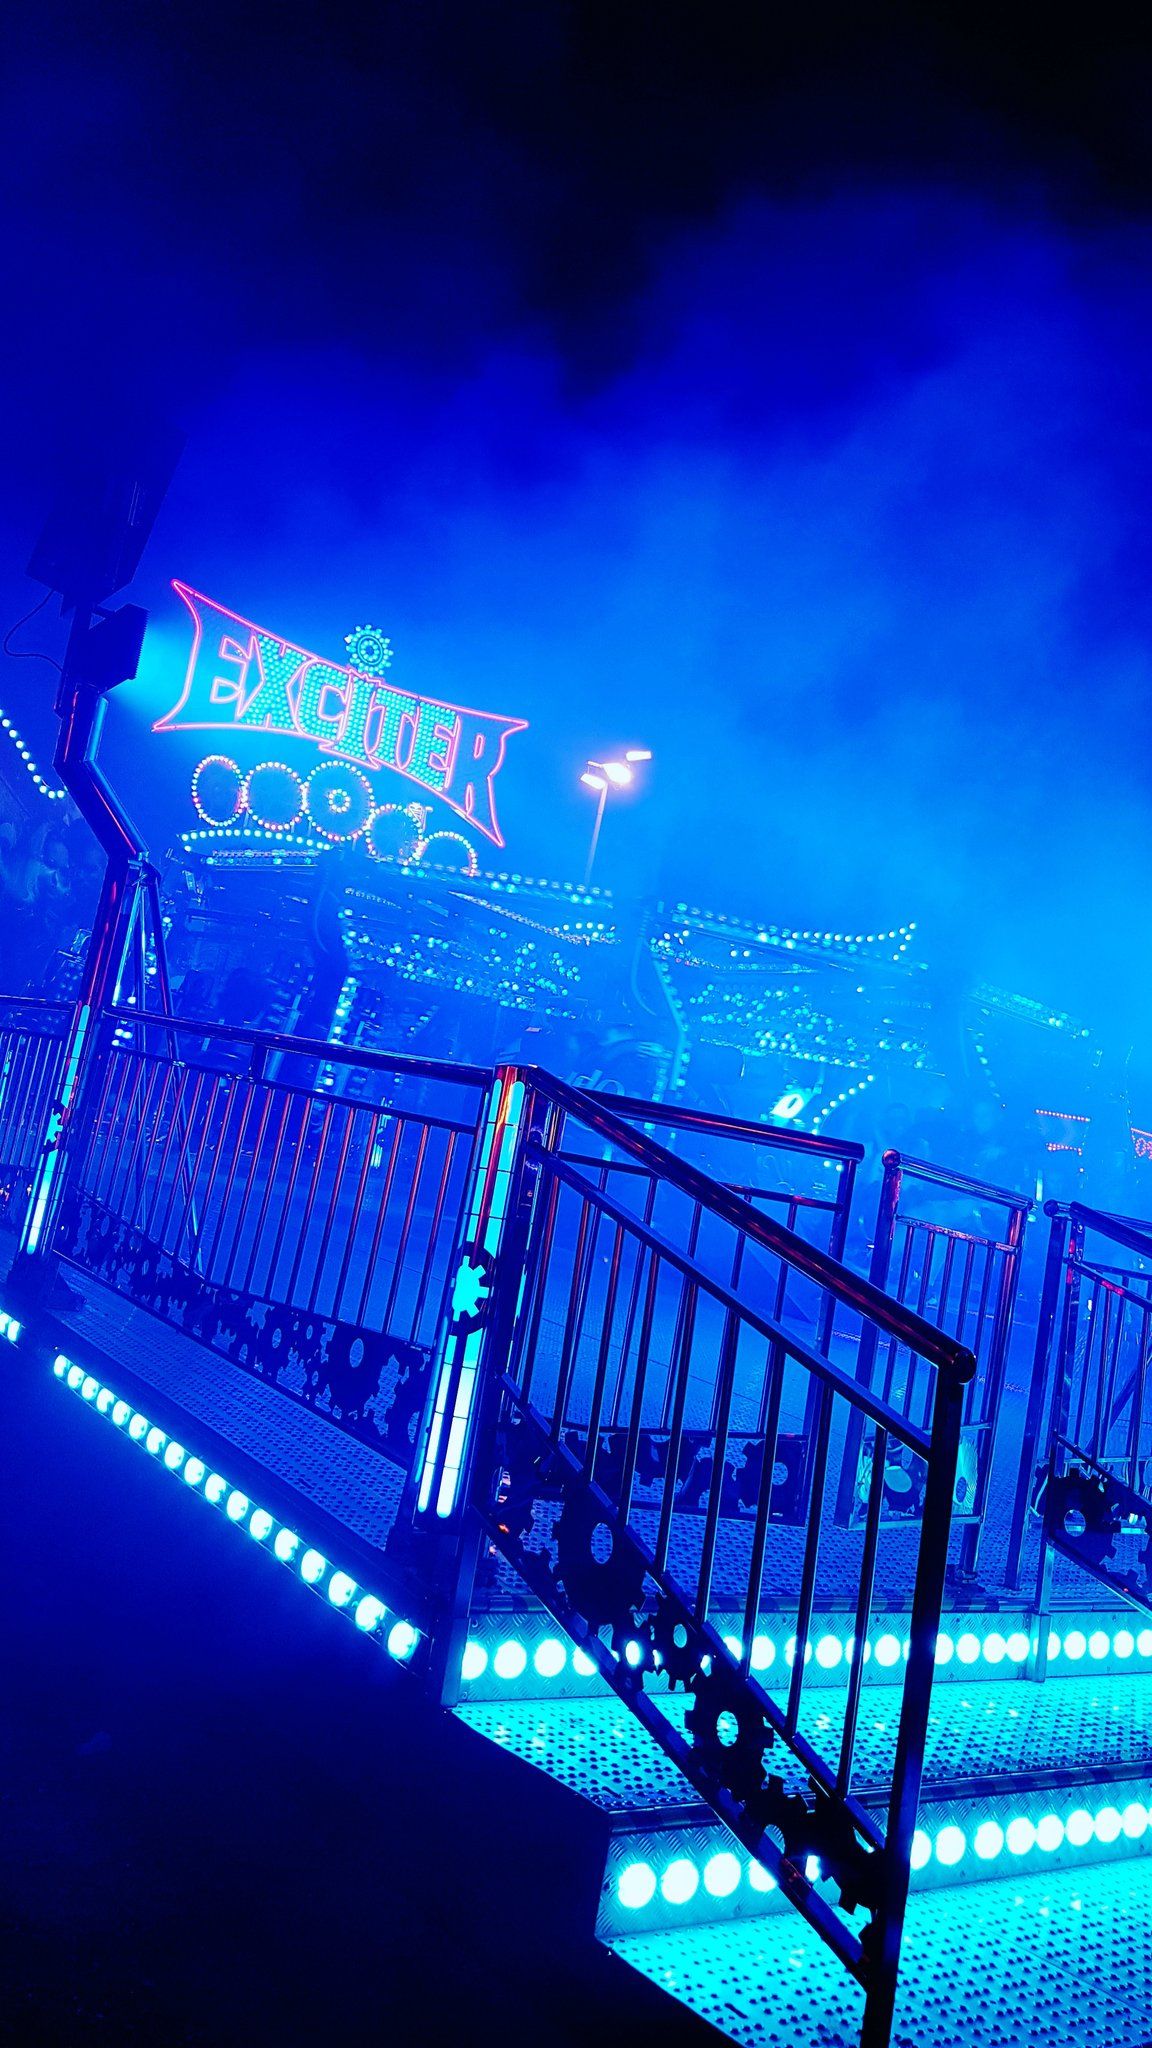 A blue neon lit roller coaster at night. - Neon blue